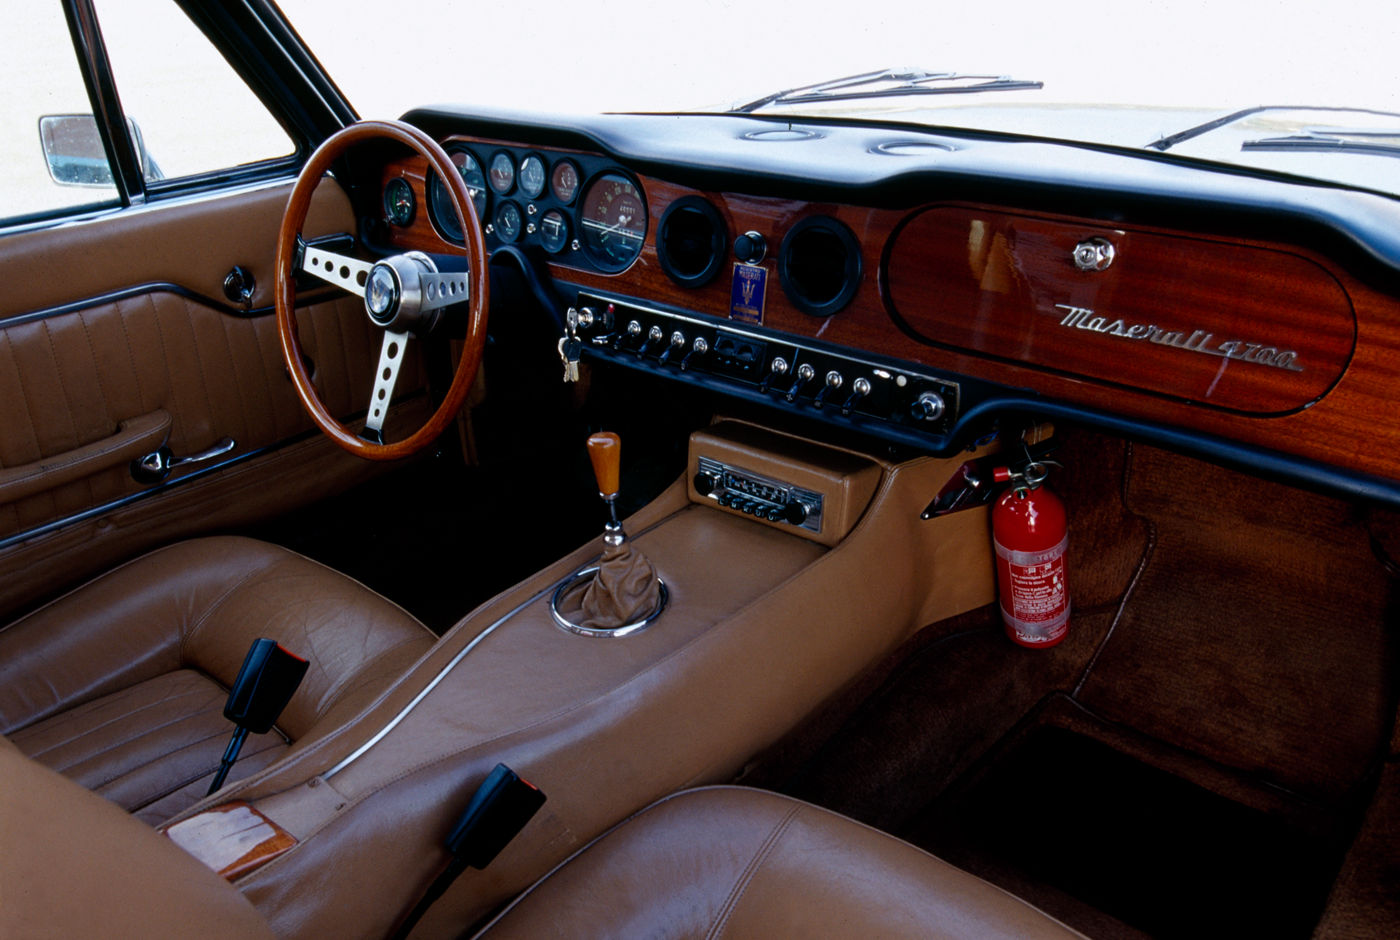 1966 Maserati Mexico - interior view of the classic sports car four-seater model